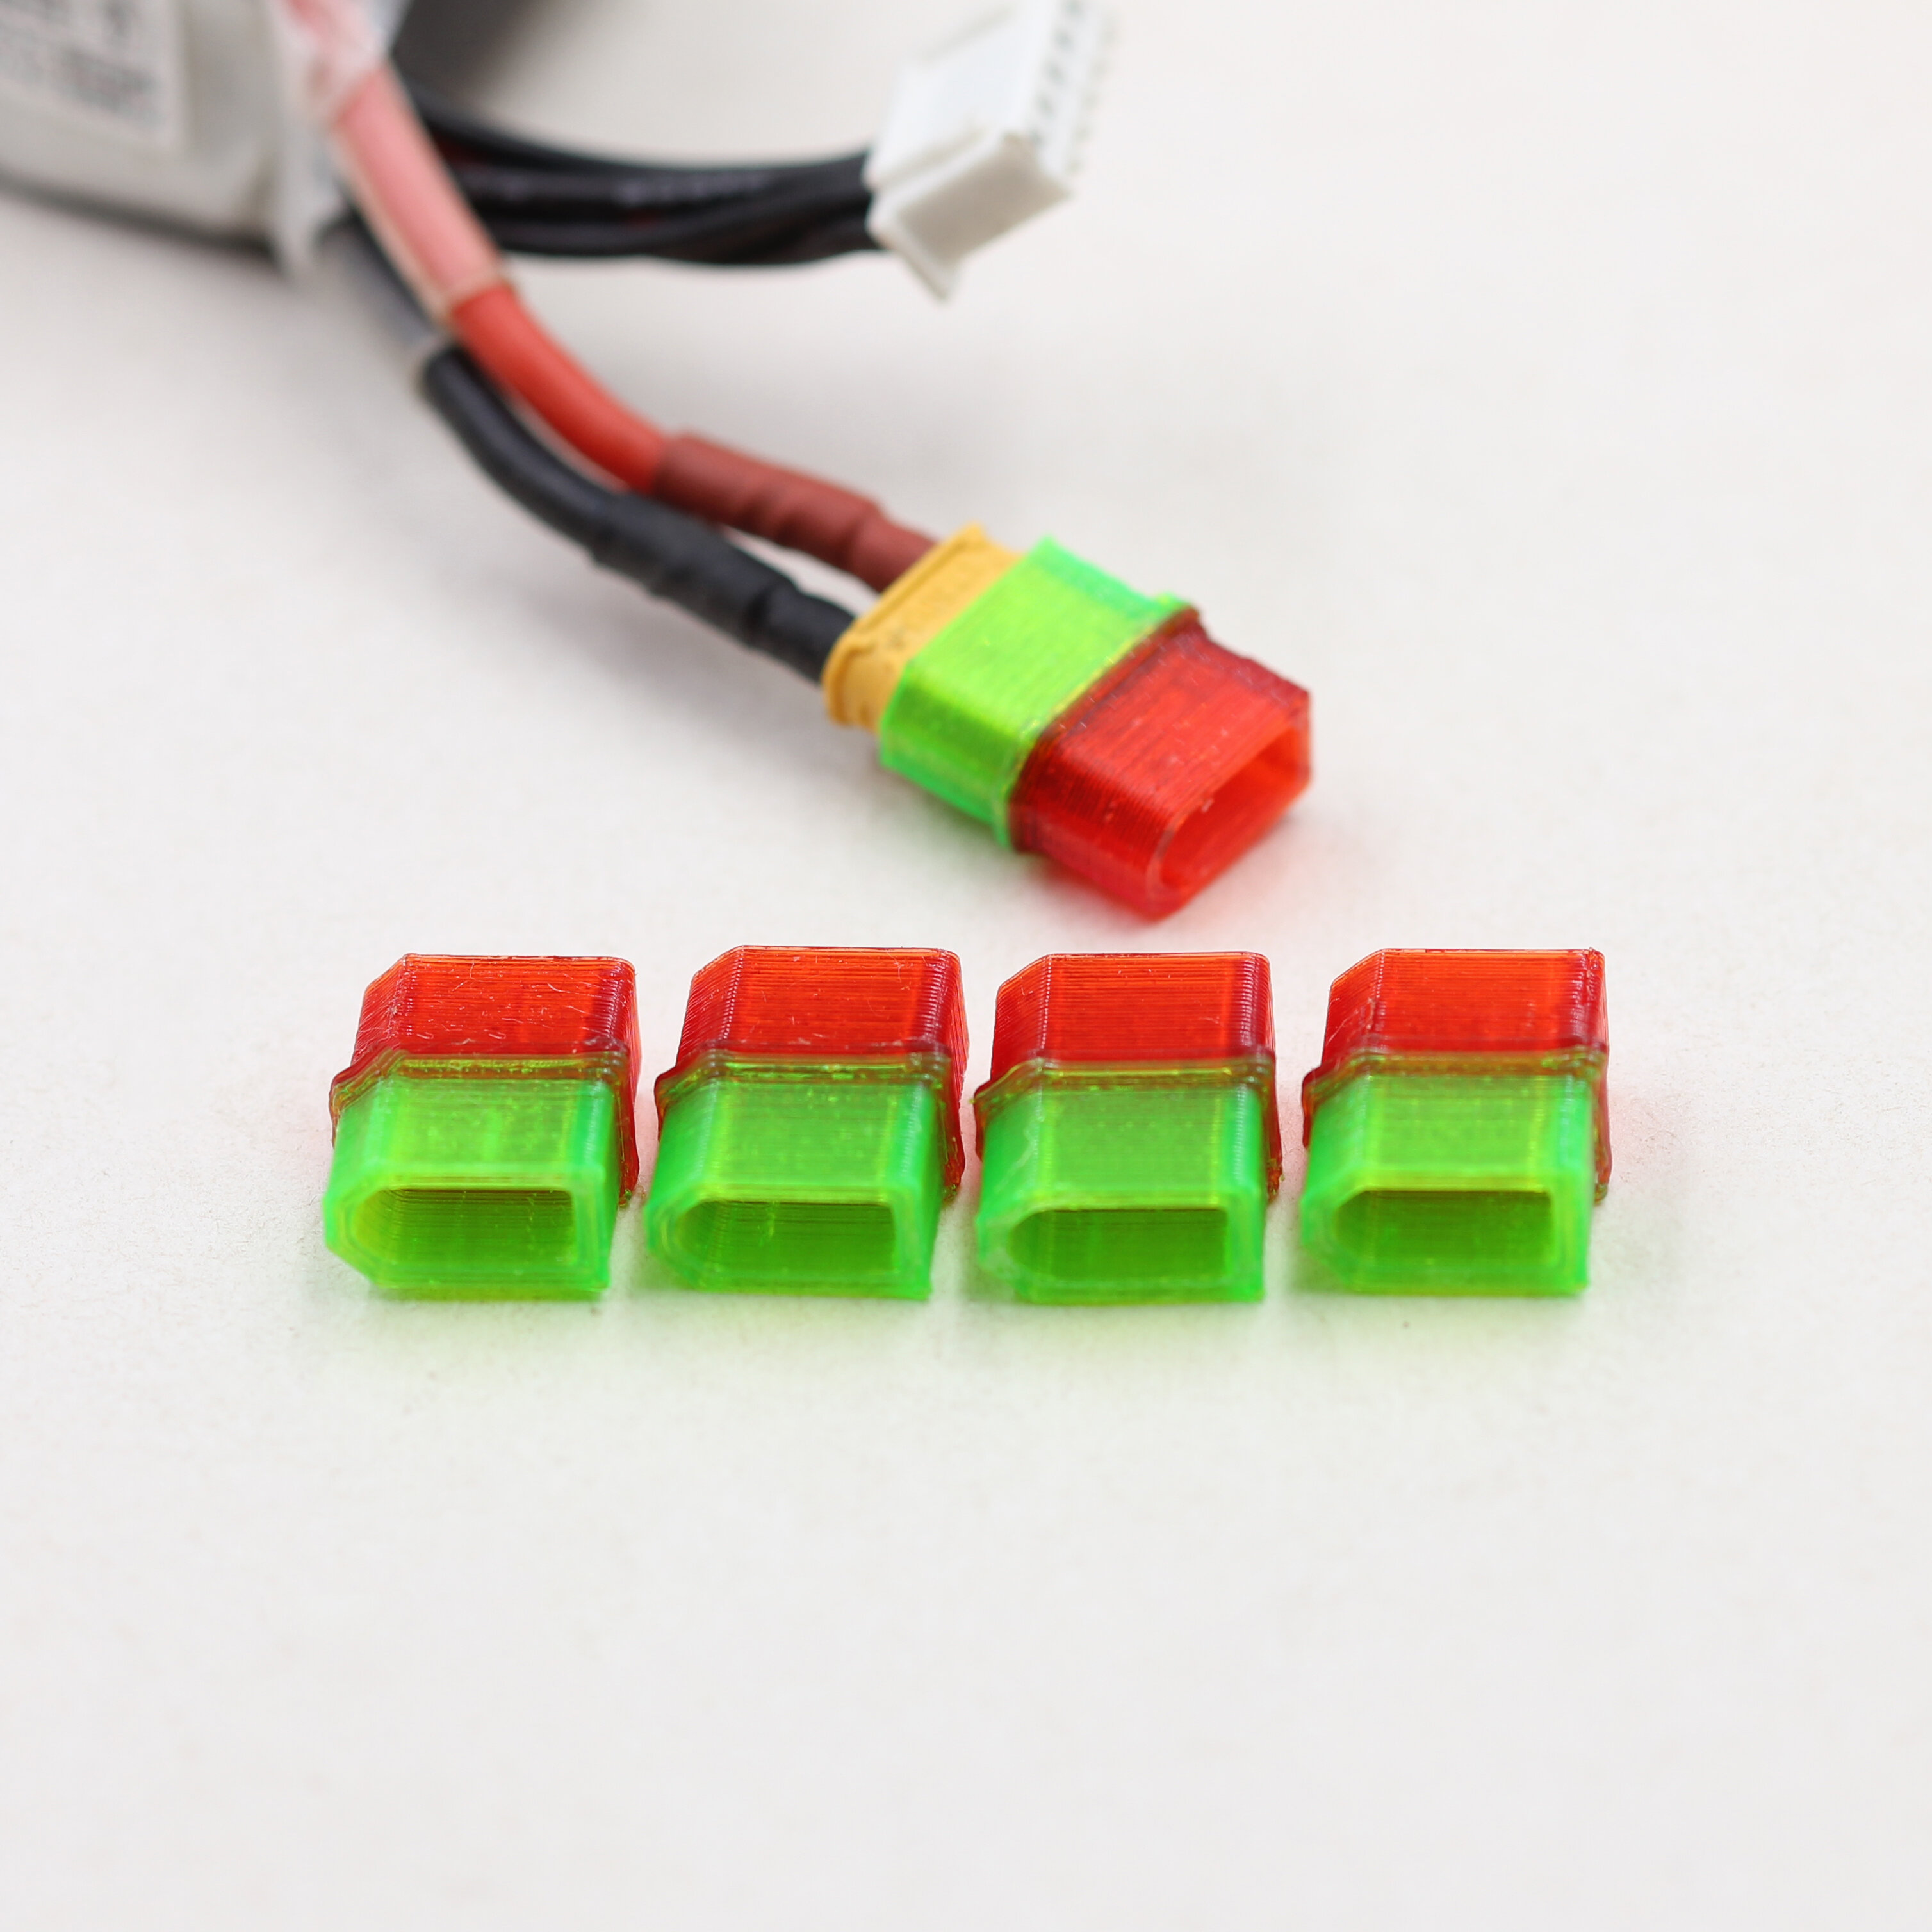 

5Pcs QY3D TPU AMASS XT30 Plug Connector Protective Case Cover for RC FPV Racing Drone Lipo Battery Spare Part